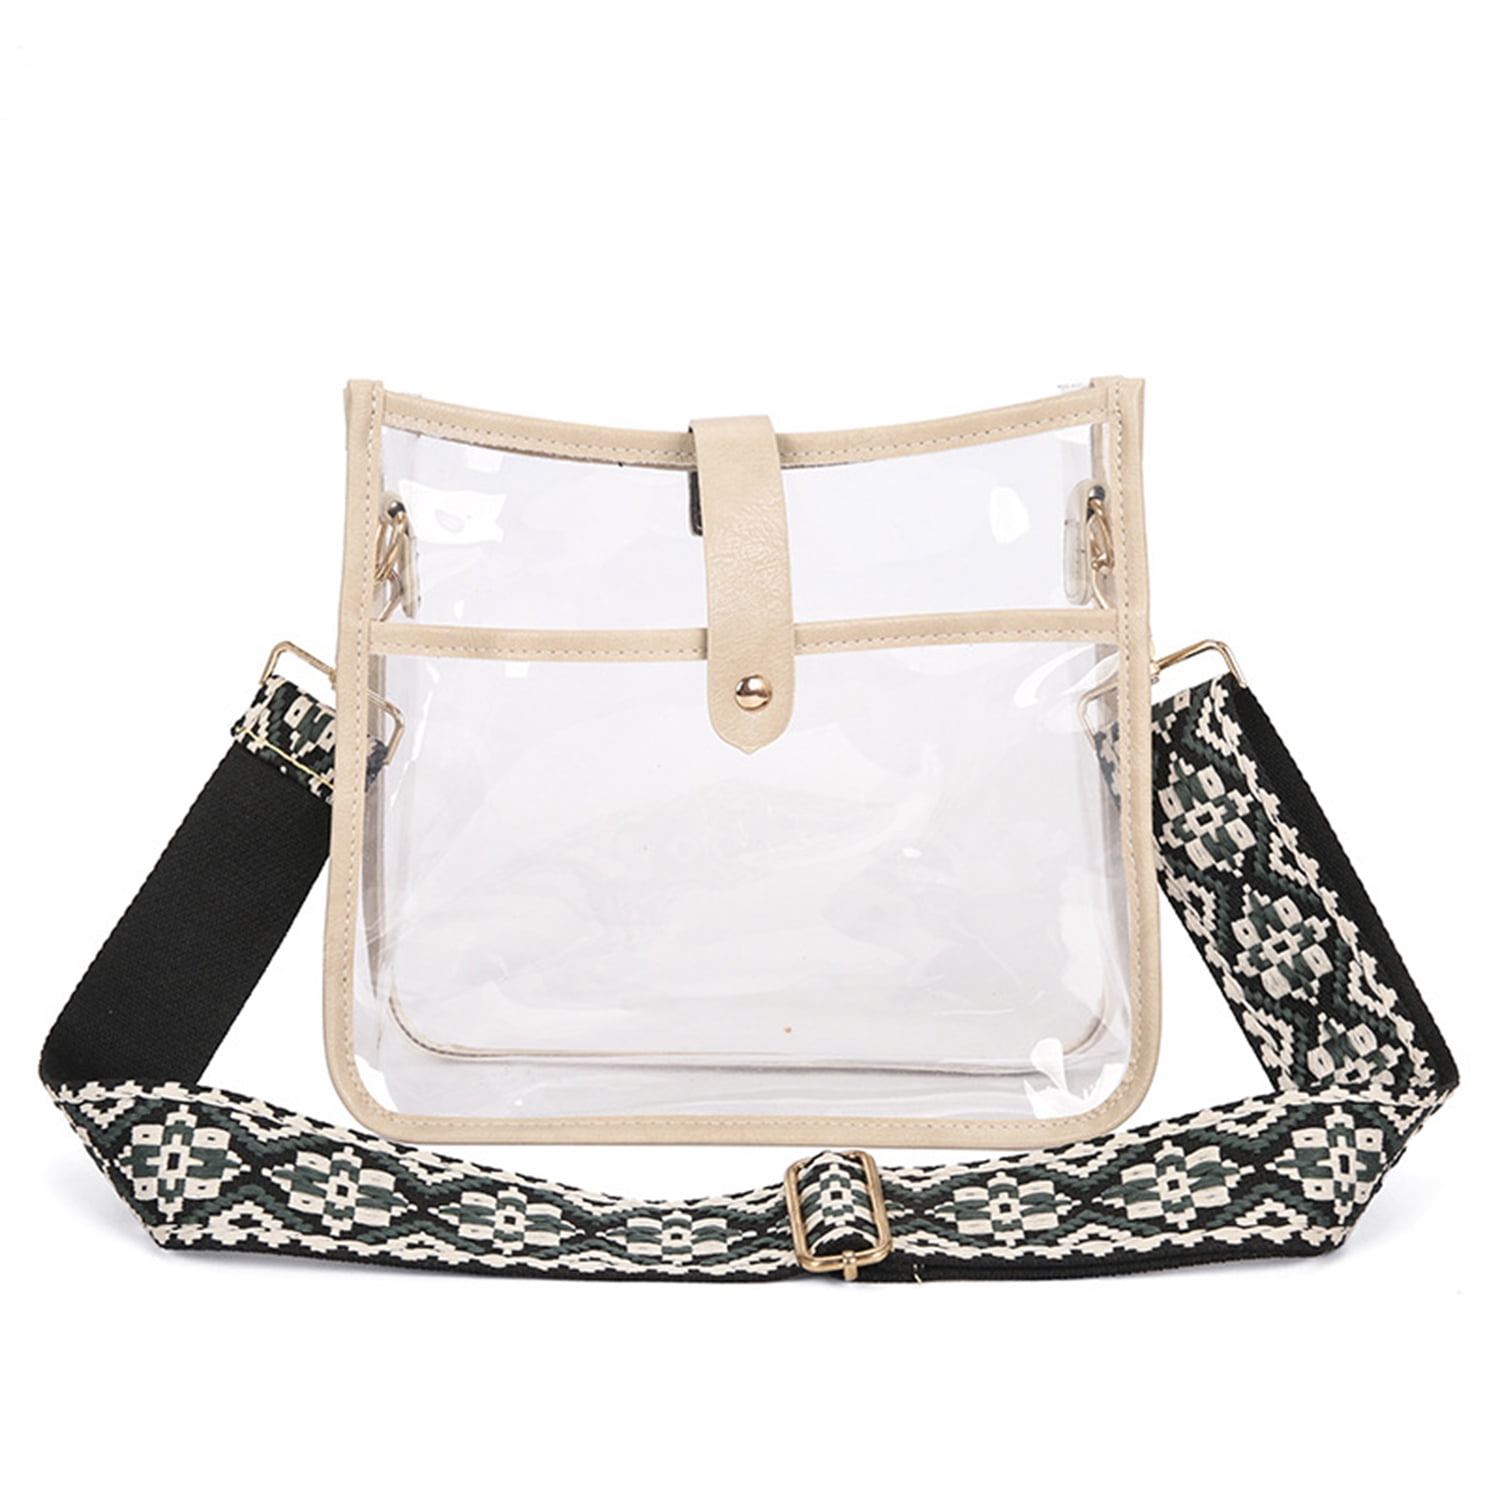 Everyday Elegance: Transparent Pvc Small-Sized Fashion Chain Women And Girl Shoulder  Crossbody Bag For Daily Activities With Fashion, Stadium Approved 12 X 12 X  6 Clear Transparent Purse Bag For Concerts Sports